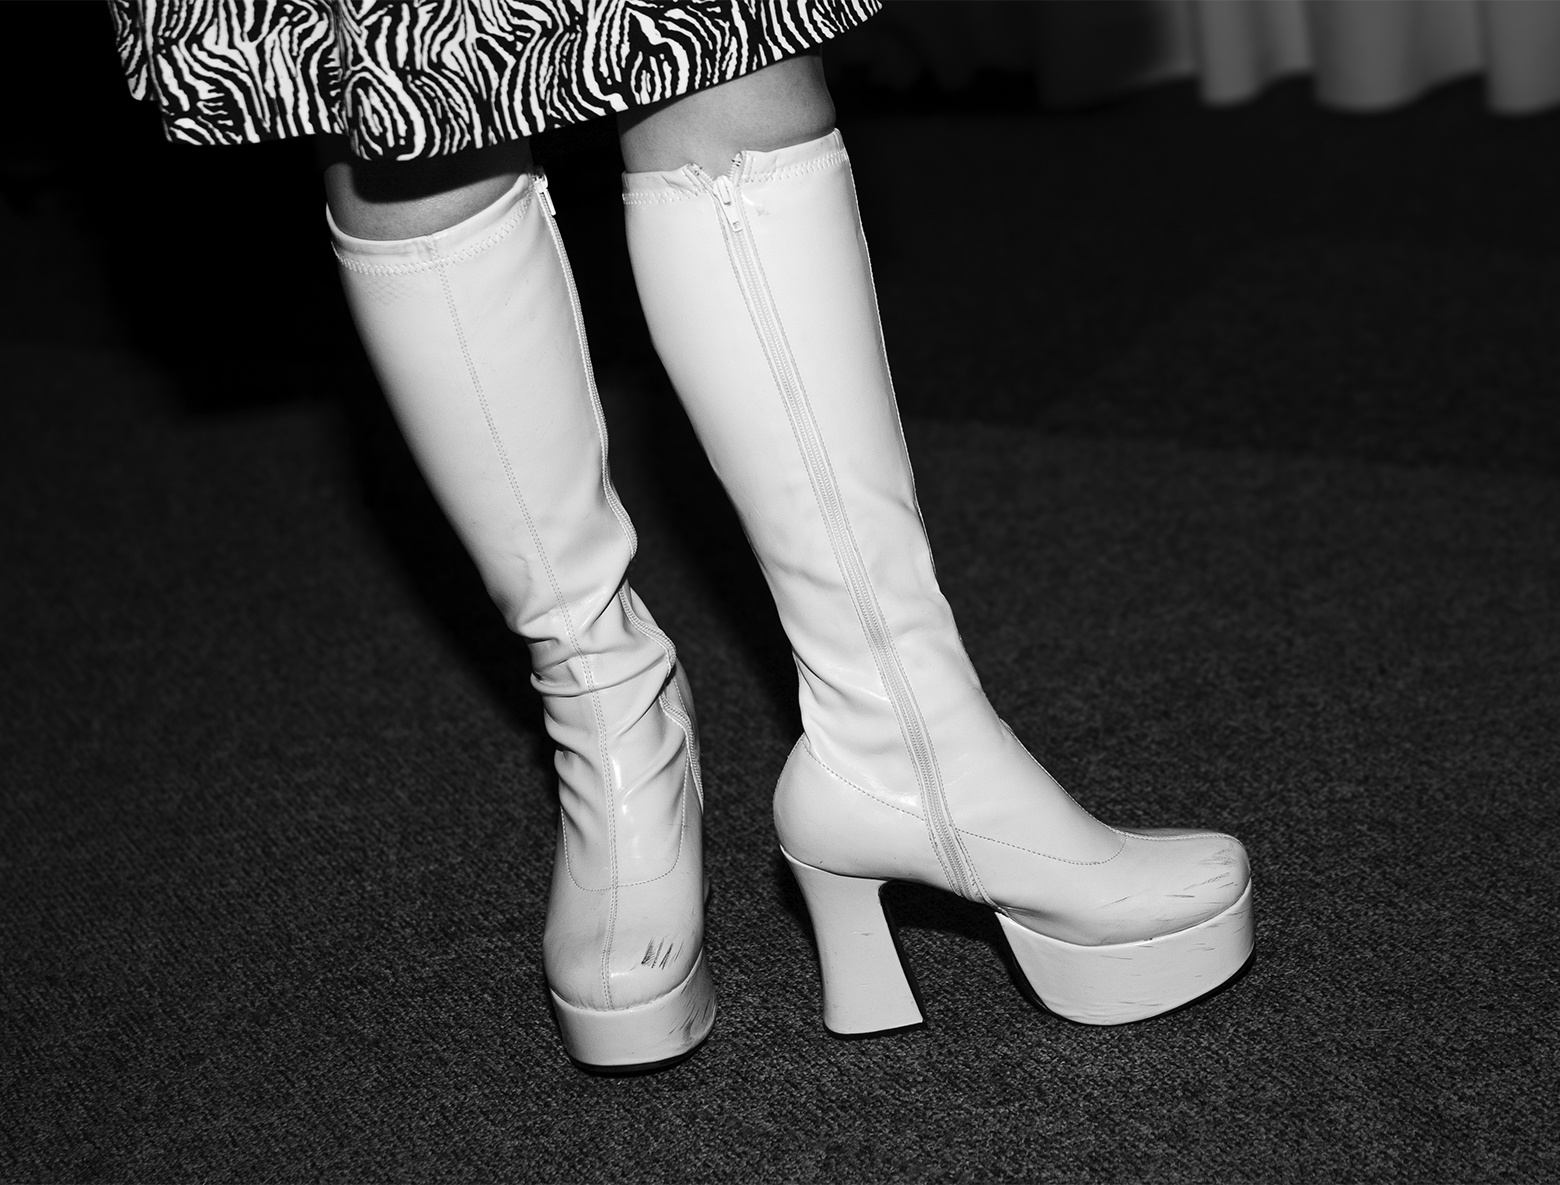 Close-up of a woman standing on carpeting from the bottom of her patterned skirt down to her slightly scuffed white leather platform boots.